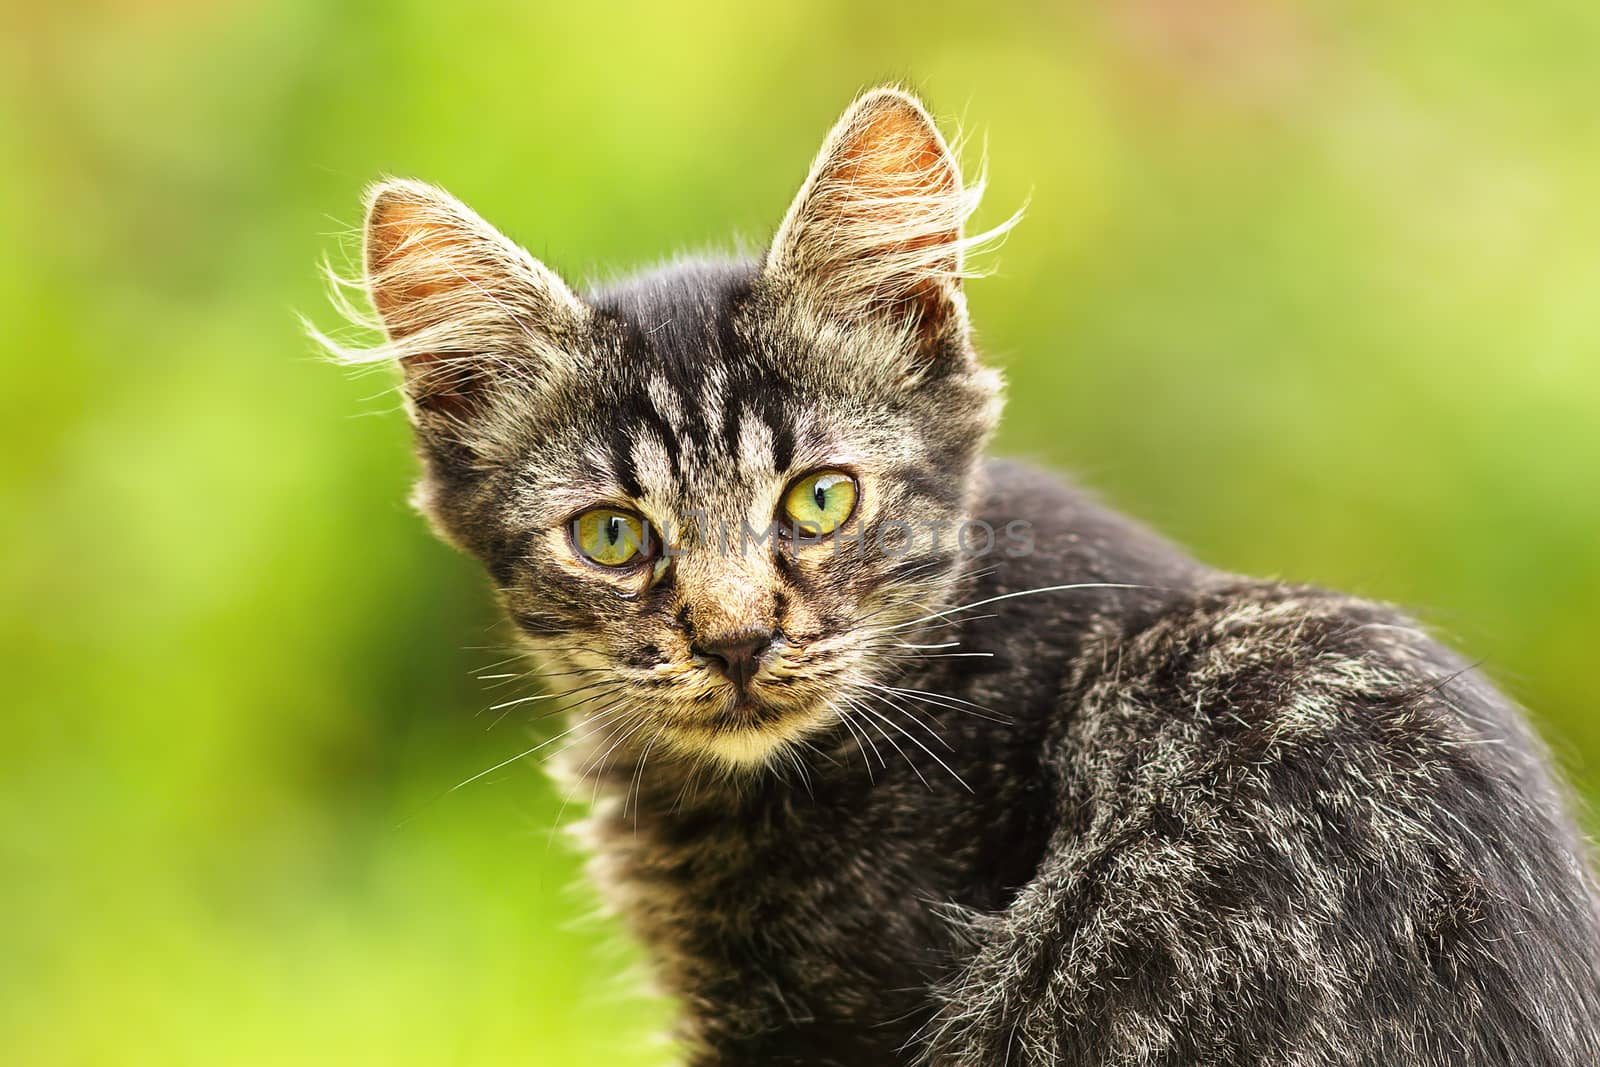 beautiful stripped kitten looking at the camera, green out of focus bokeh background in the garden; curious cute domestic young animal